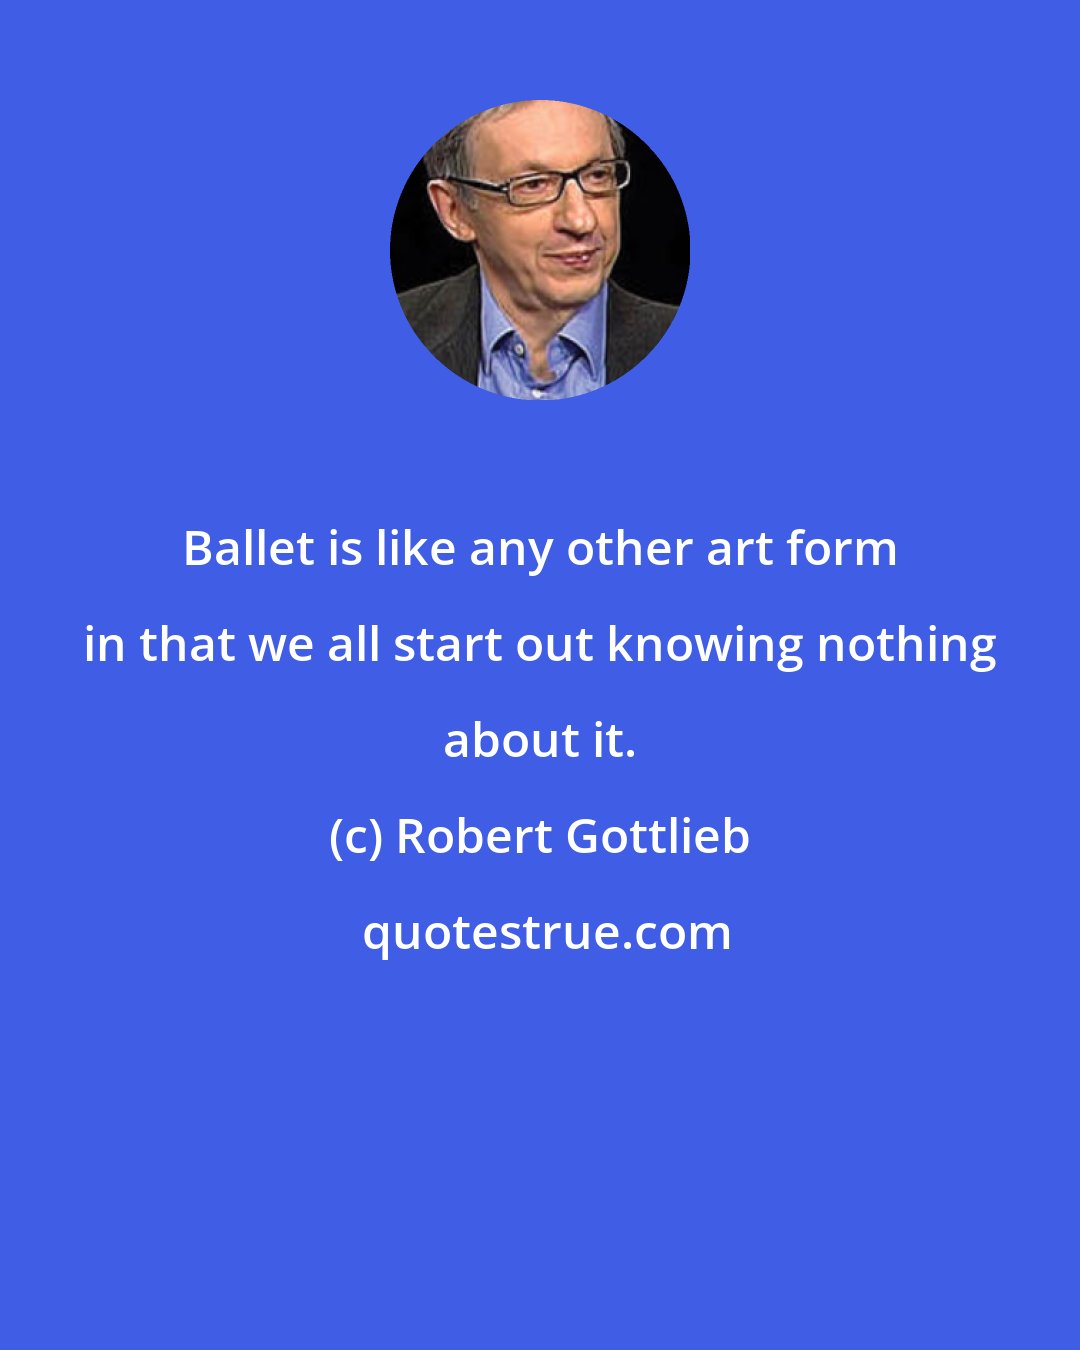 Robert Gottlieb: Ballet is like any other art form in that we all start out knowing nothing about it.